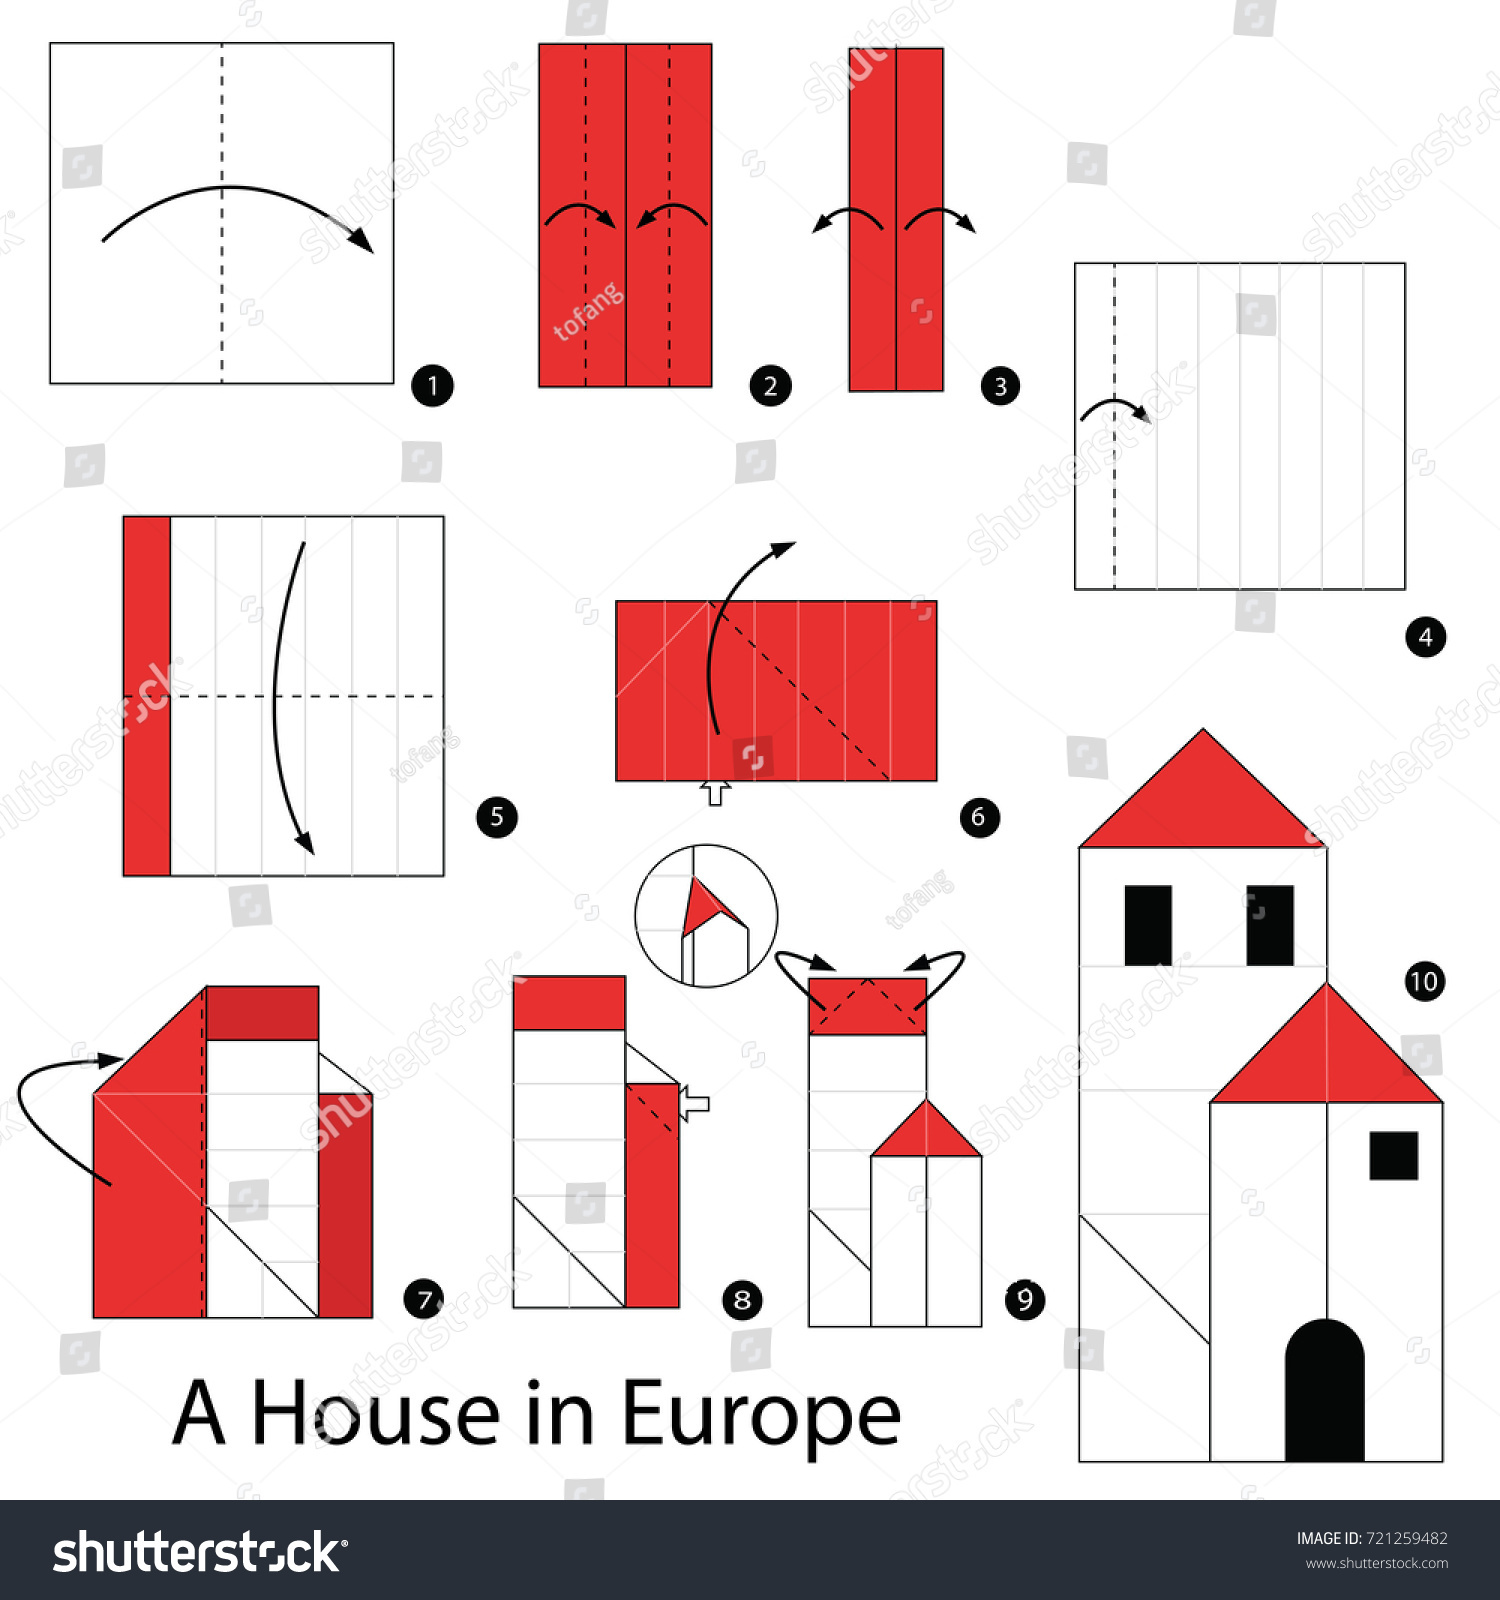 Origami House Instructions With Pictures